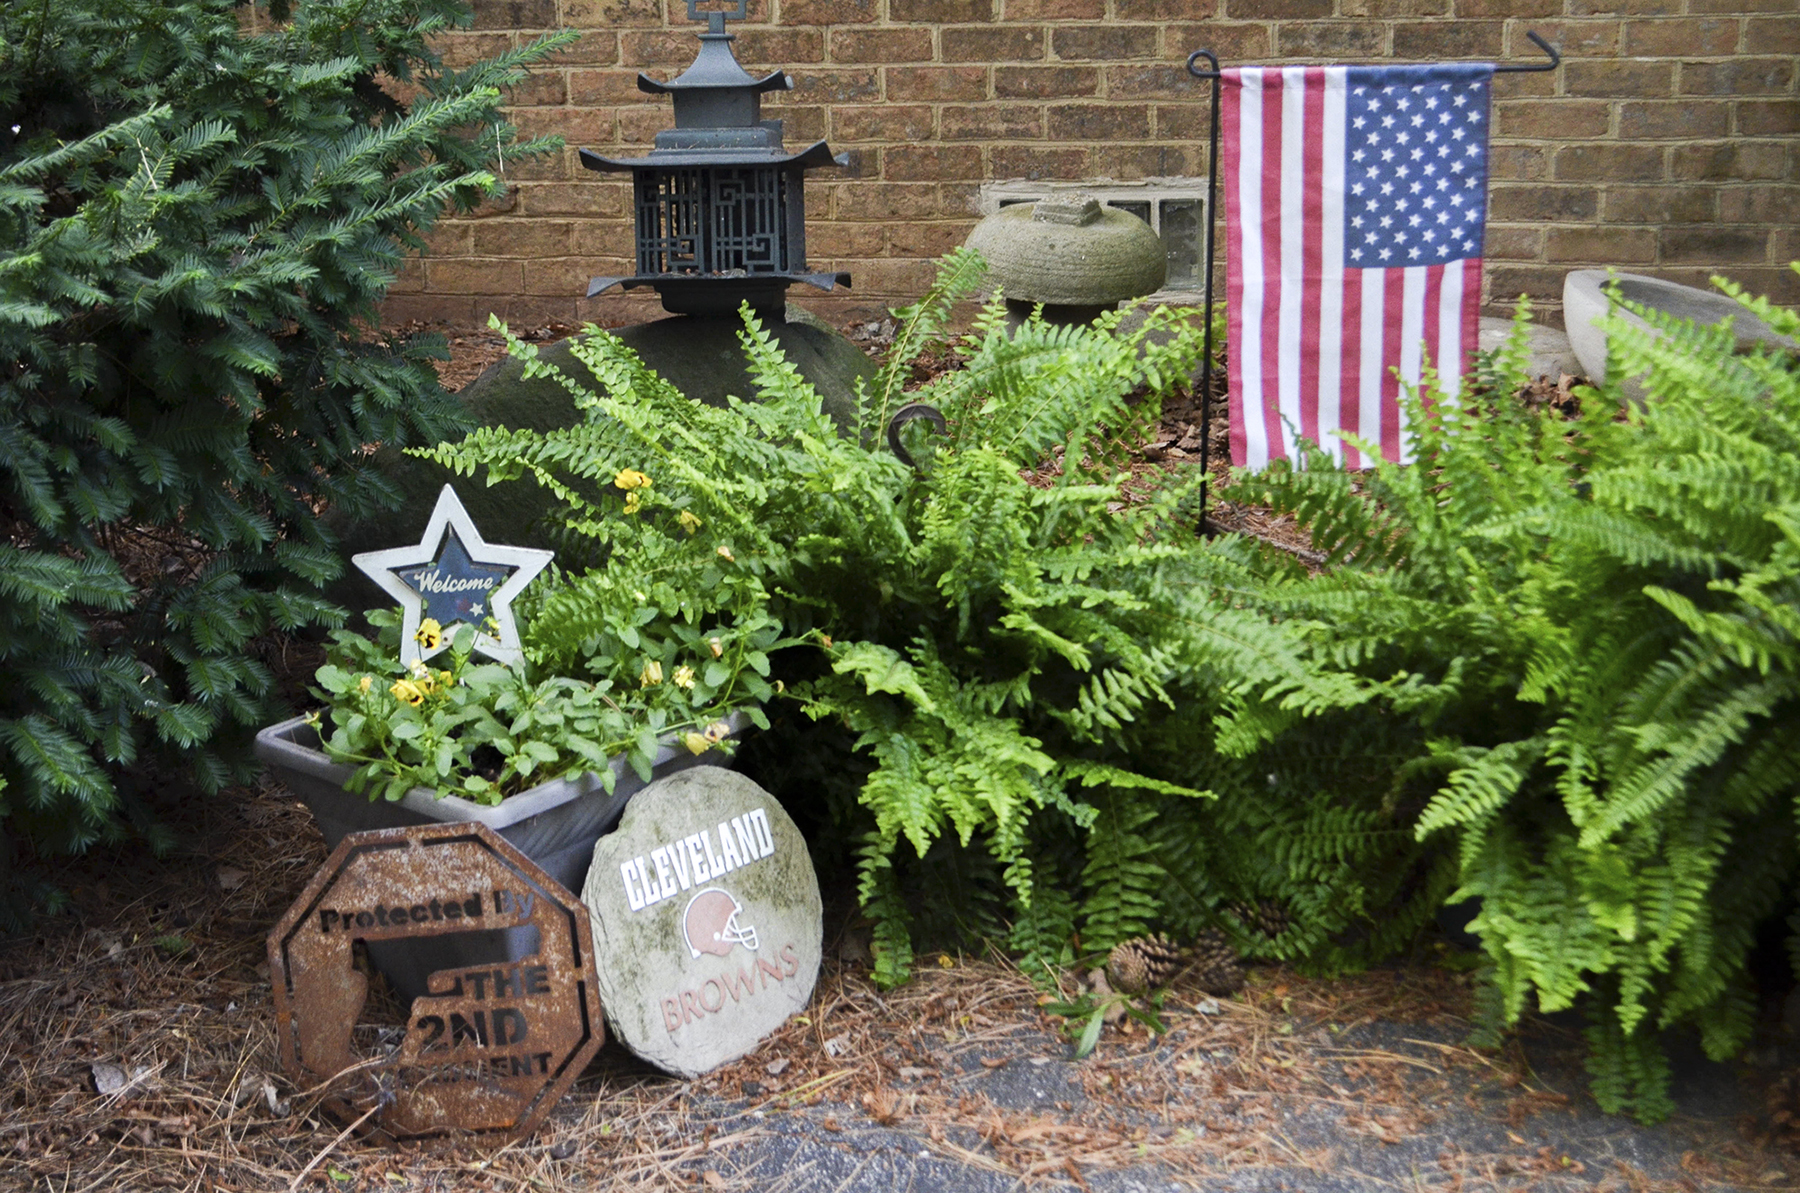 Kathy Miller, the Mahoning County chairwoman for Donald Trump, decorated her garden in Boardman, Ohio, with a pro-gun-rights sign, a Cleveland Browns sign and an American flag. She said people are fed up with the direction of the country and are looking to Trump for change. (Lian Bunny/News21)